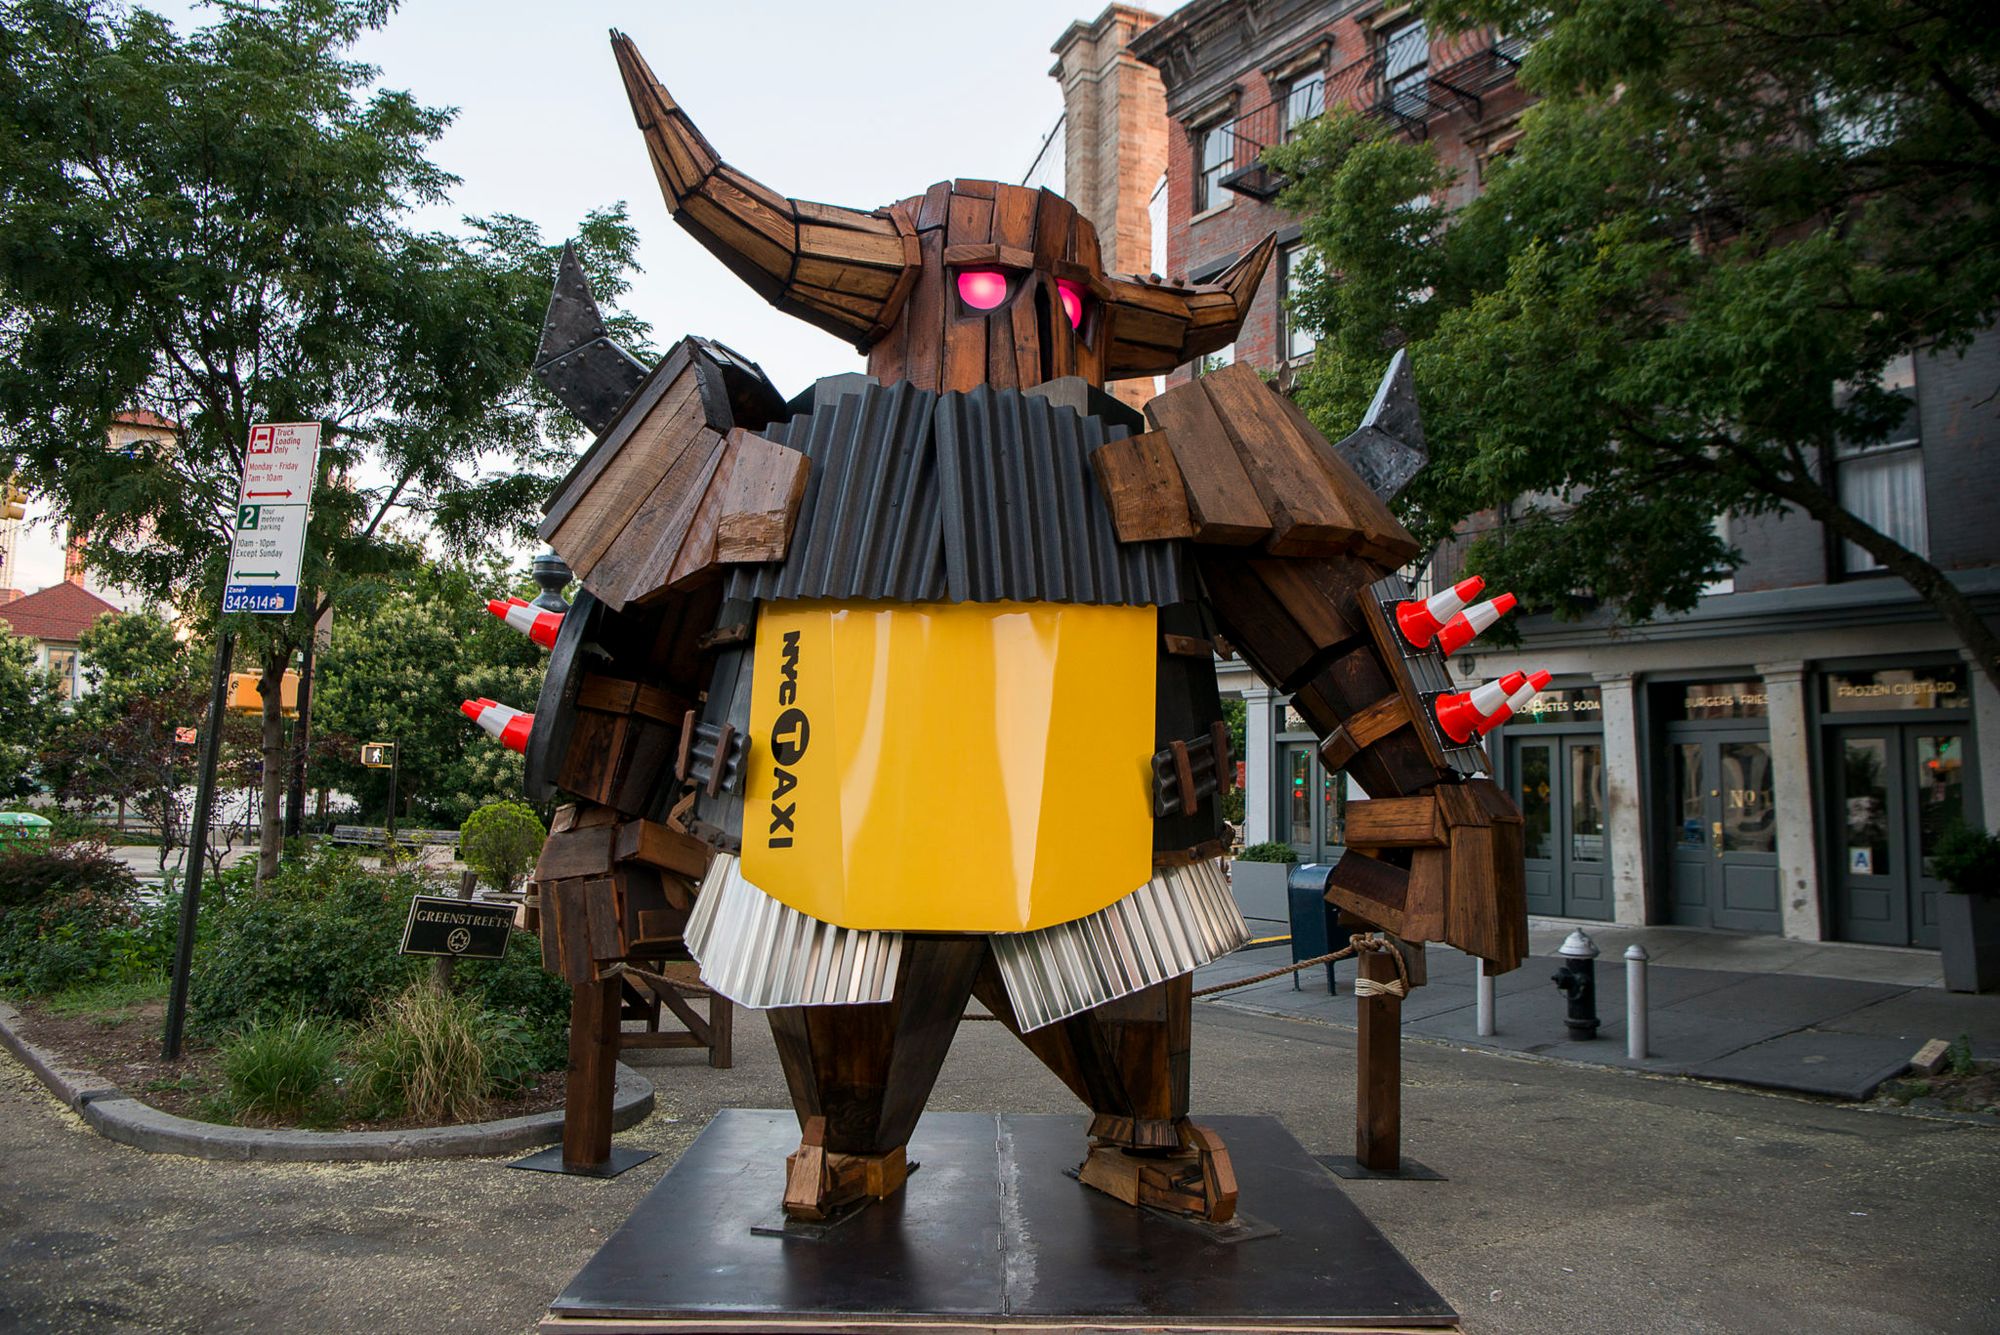 Check Out Two Clash Of Clans Sculptures In DUMBO This Weekend